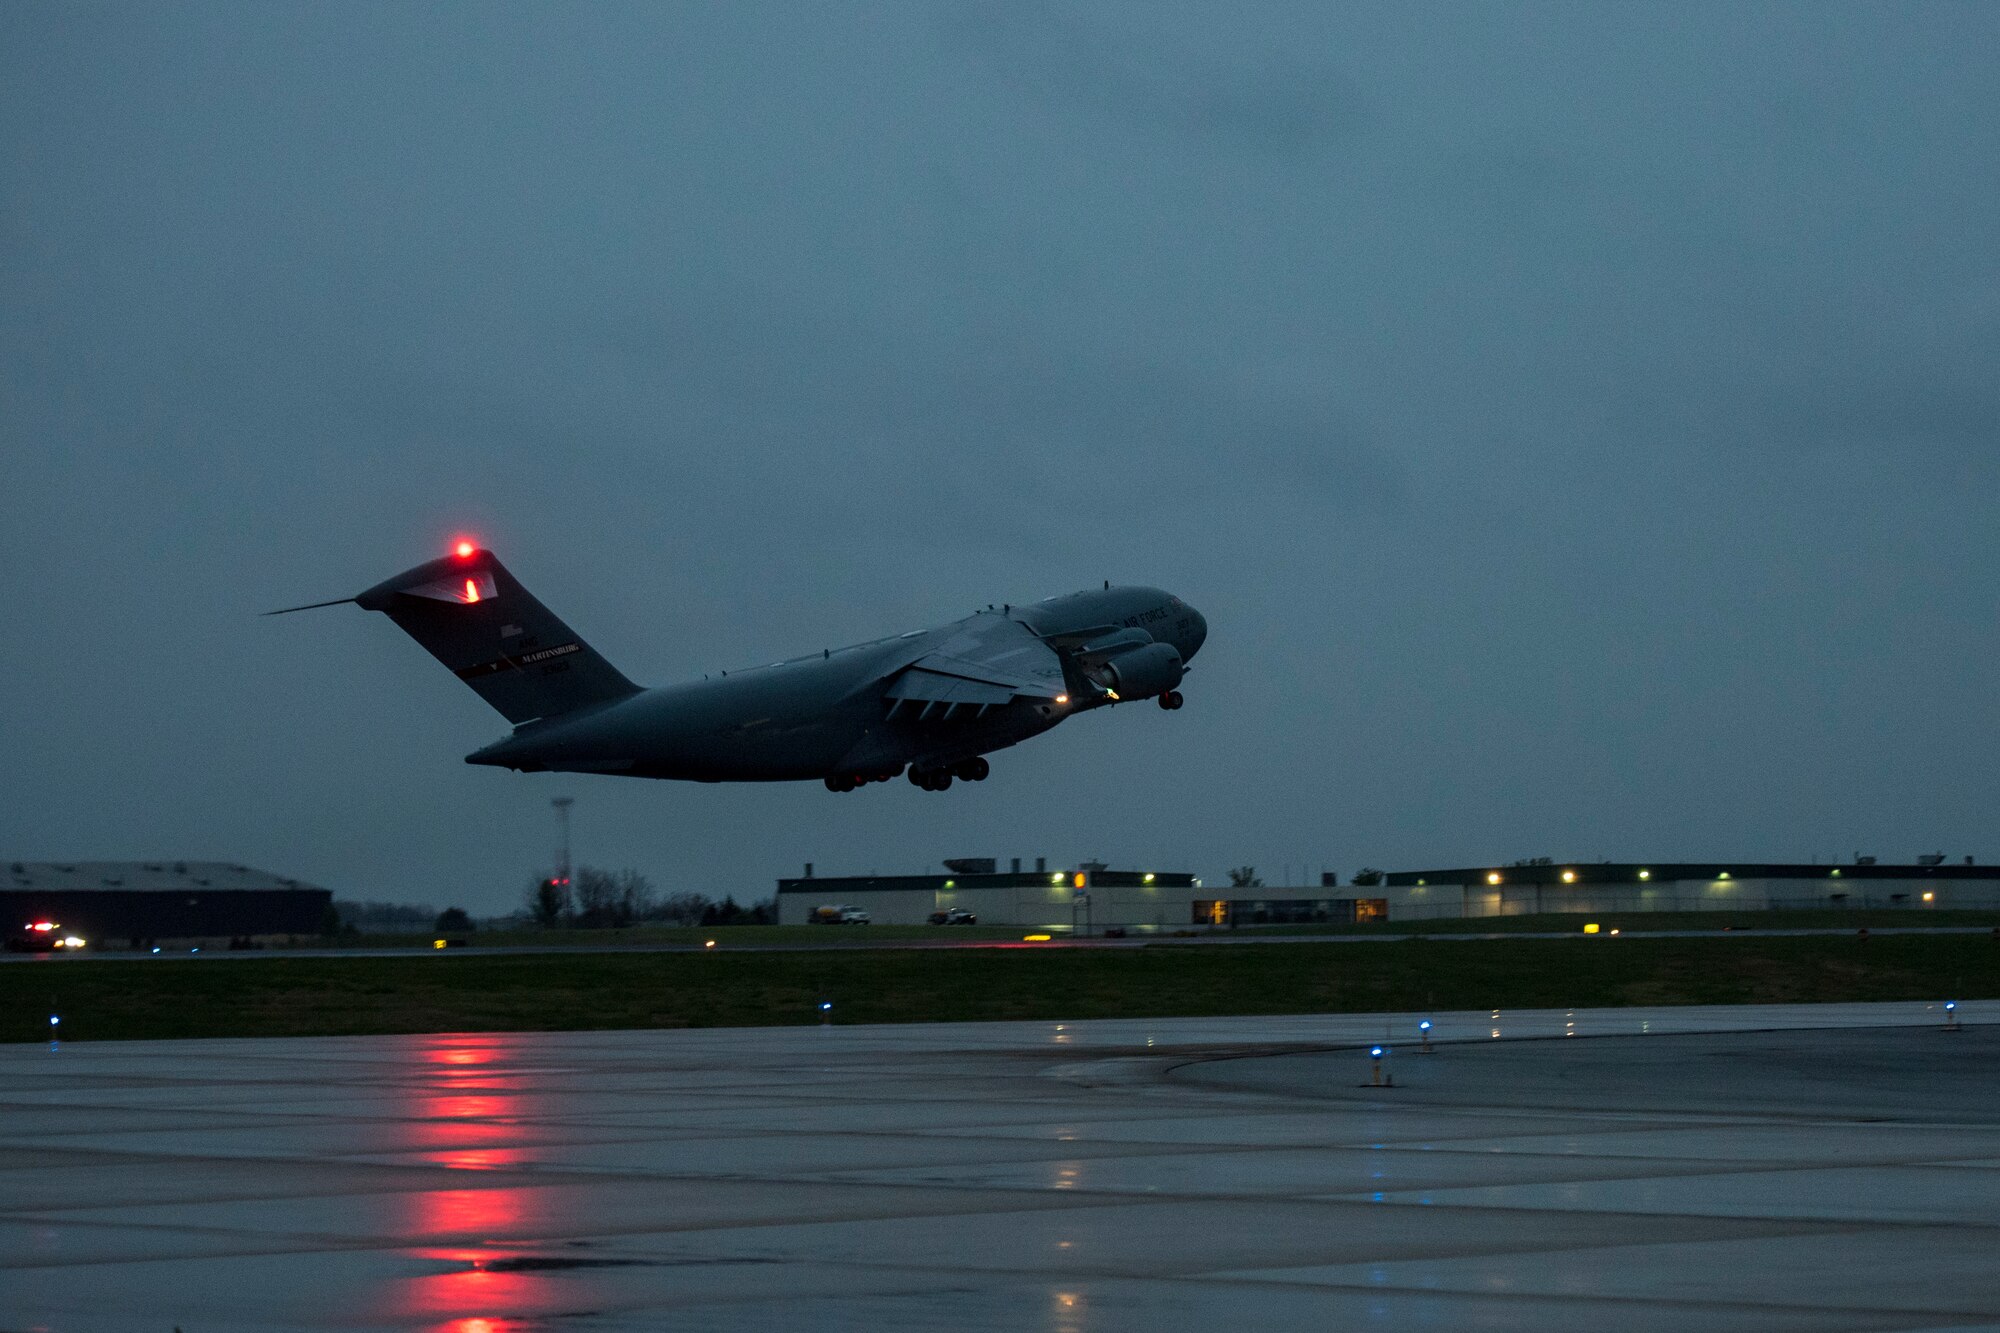 The 167th Airlift Wing transported just over one million COVID-19 test kits from Aviano Air Base, Italy to Memphis, Tenn., April 16, 2020. The test kits, which are maunufactured in Italy, will be distributed throughout the nation from the Fed Ex hub in Tennessee. Eighteen pallets filled the cargo compartment of the C-17 Globemaster III aircraft, crewed by seven 167th AW Airmen.